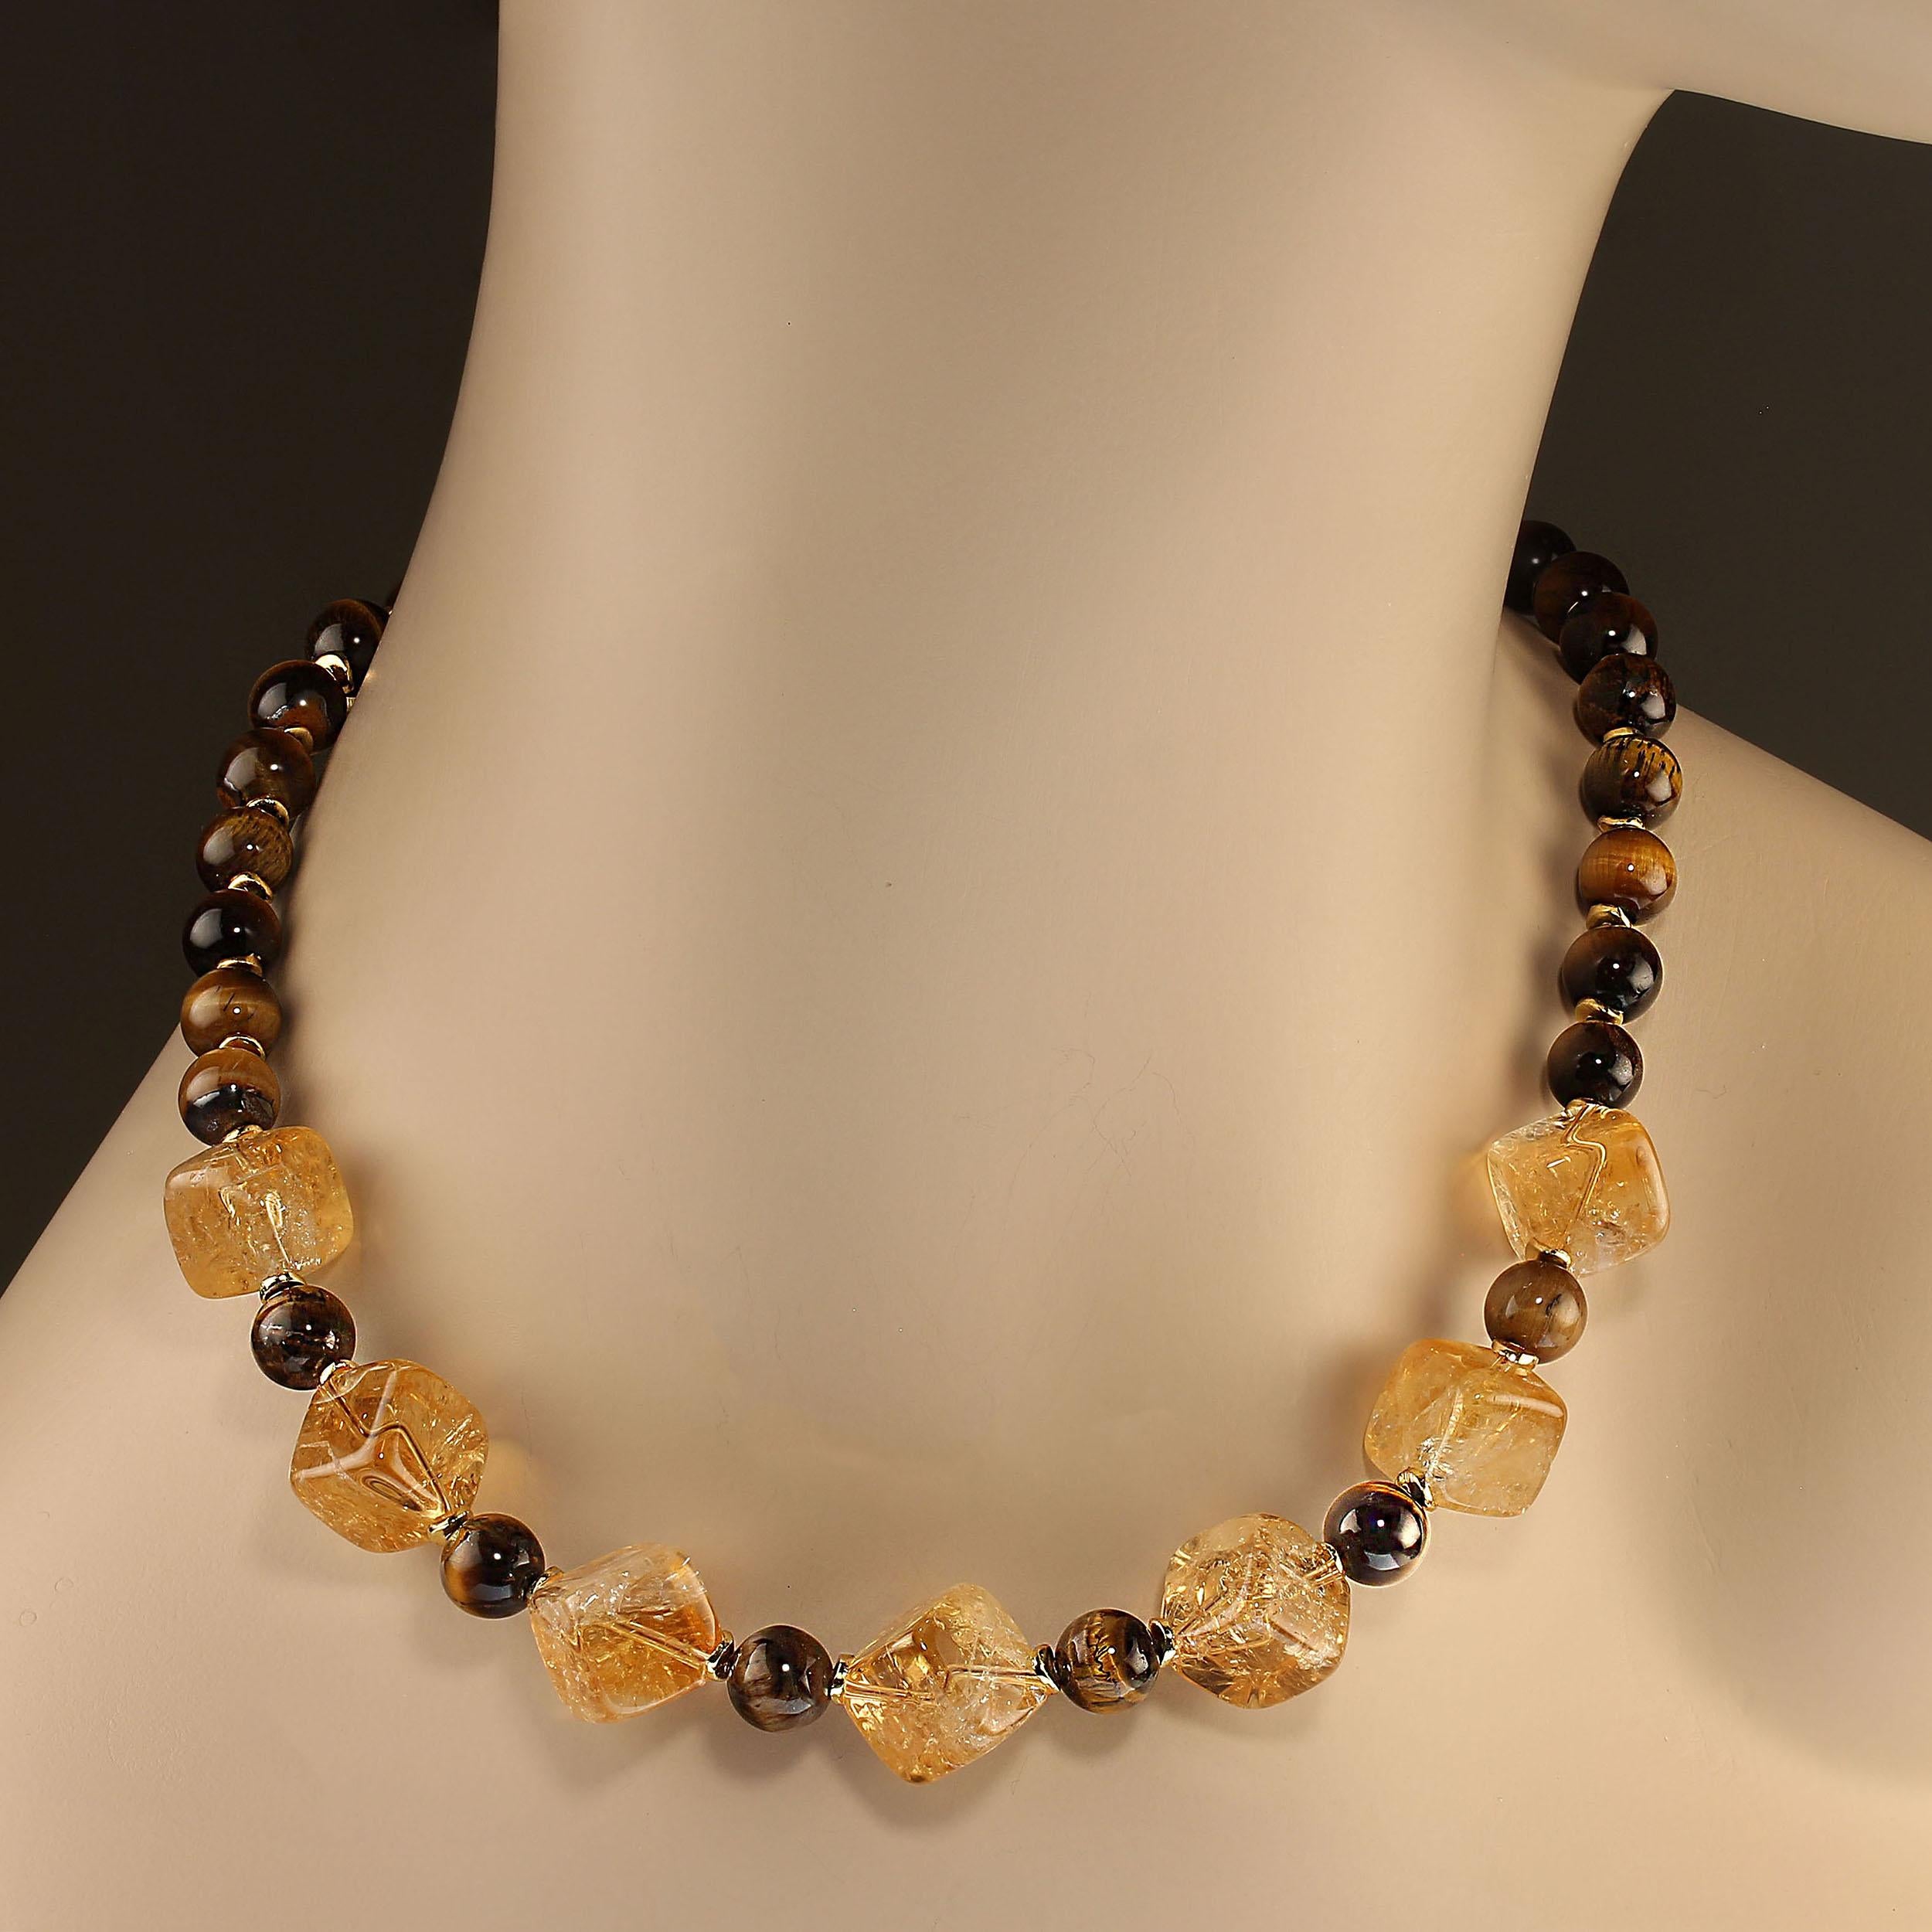 Bead AJD 18 Inch Statement Citrine and Tiger's Eye Necklace For Sale